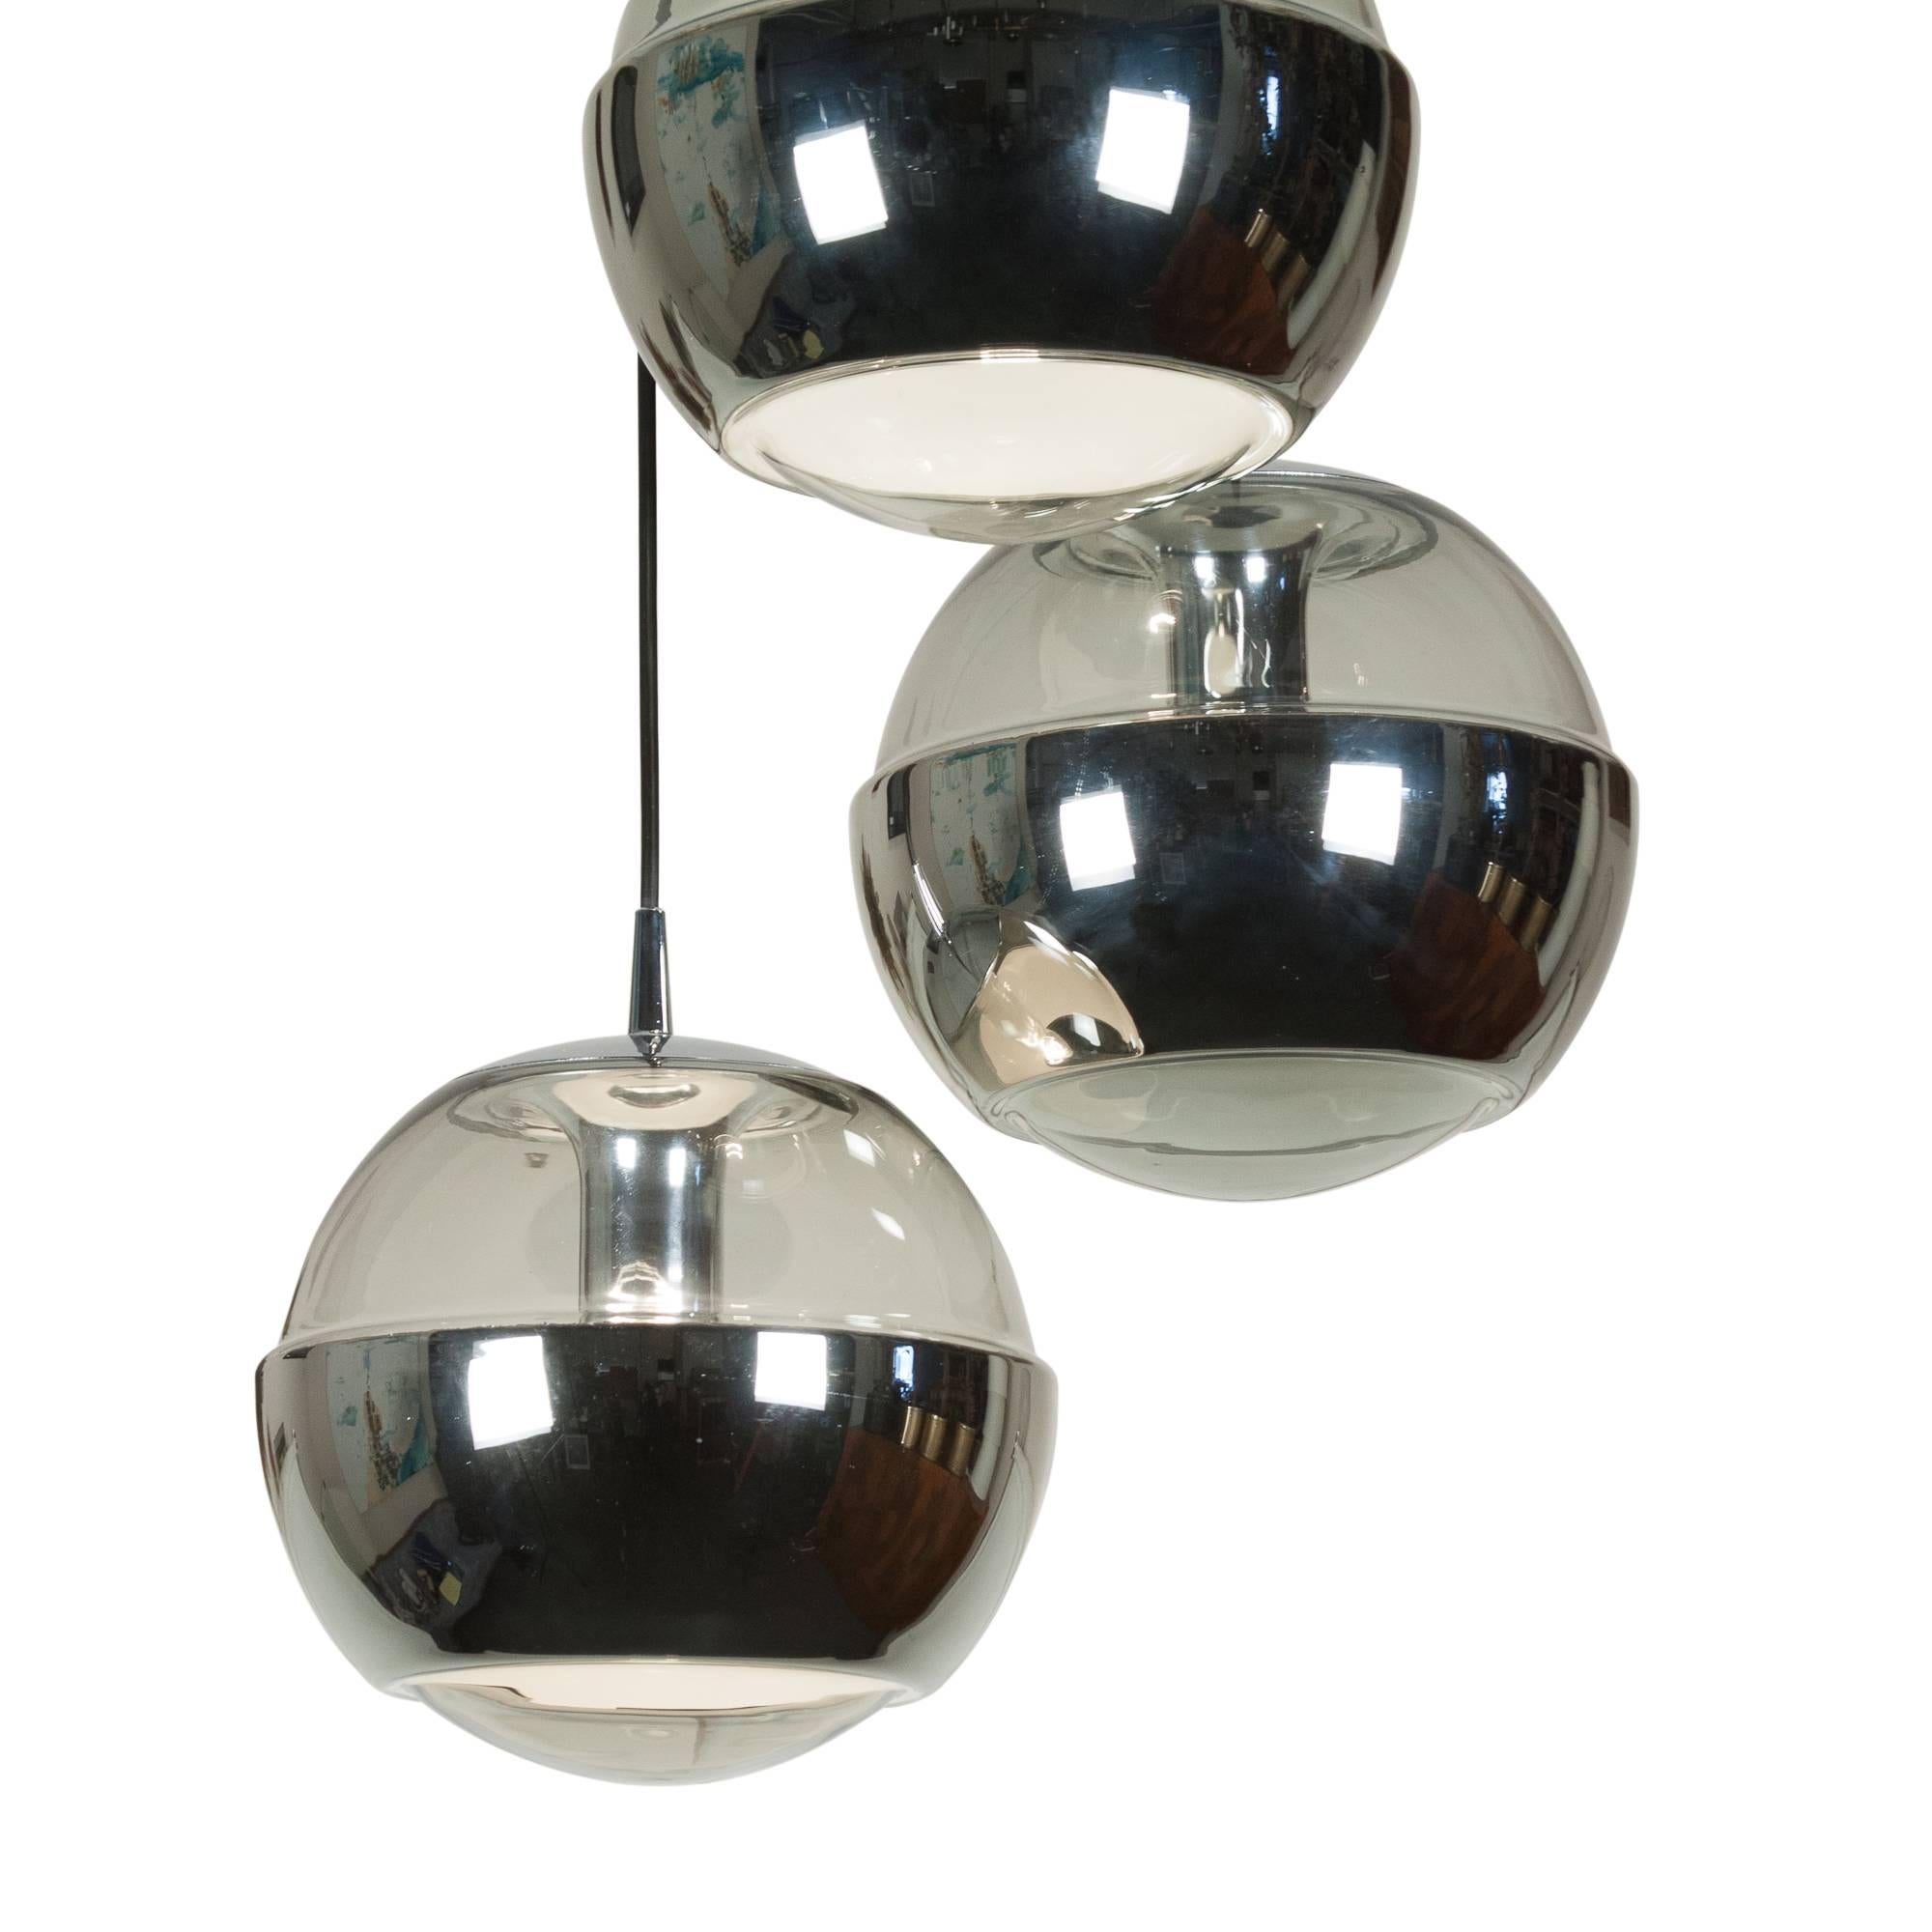 Silver glass three-light hanging chandelier, each sphere having a smoky glass upper half, the lower half with applied interior silver foil, by Peill and Putzler, German, 1960s. Each sphere has diameter of 12 1/2 in. Overall height 40 in.